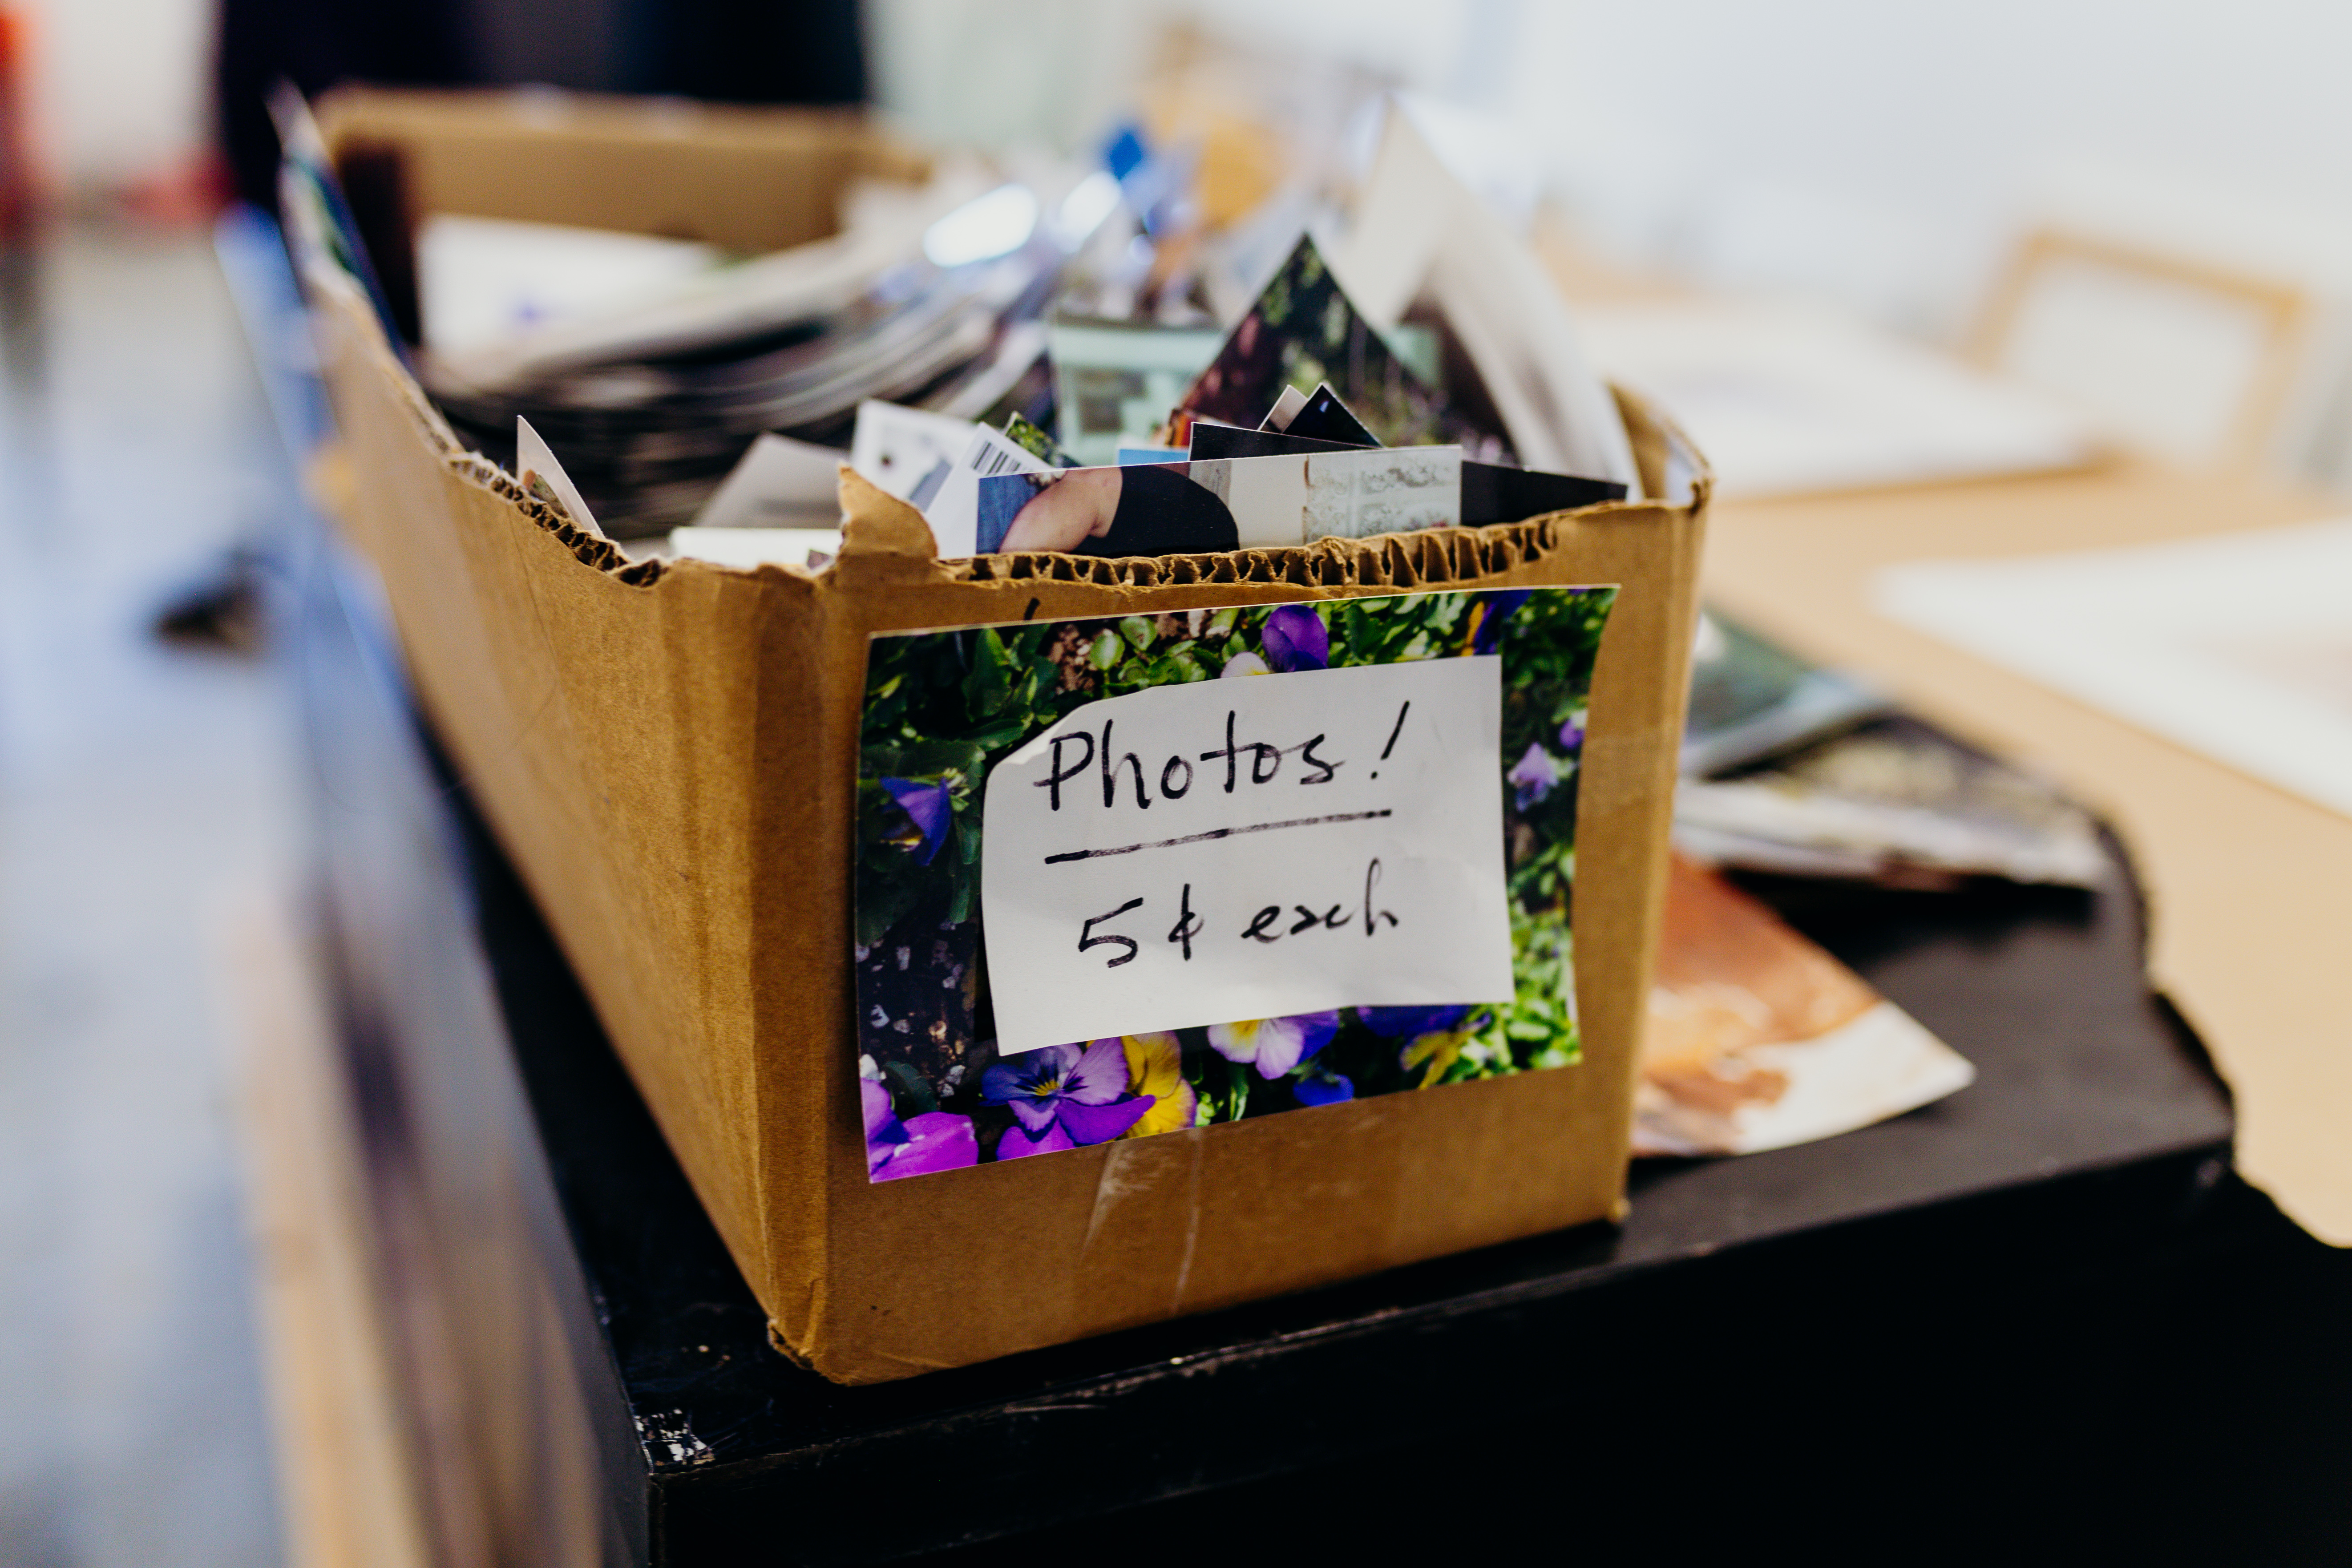 A cardboard box filled with many photographs. There is a piece of paper taped to the word that reads: Photos! 5 cents each